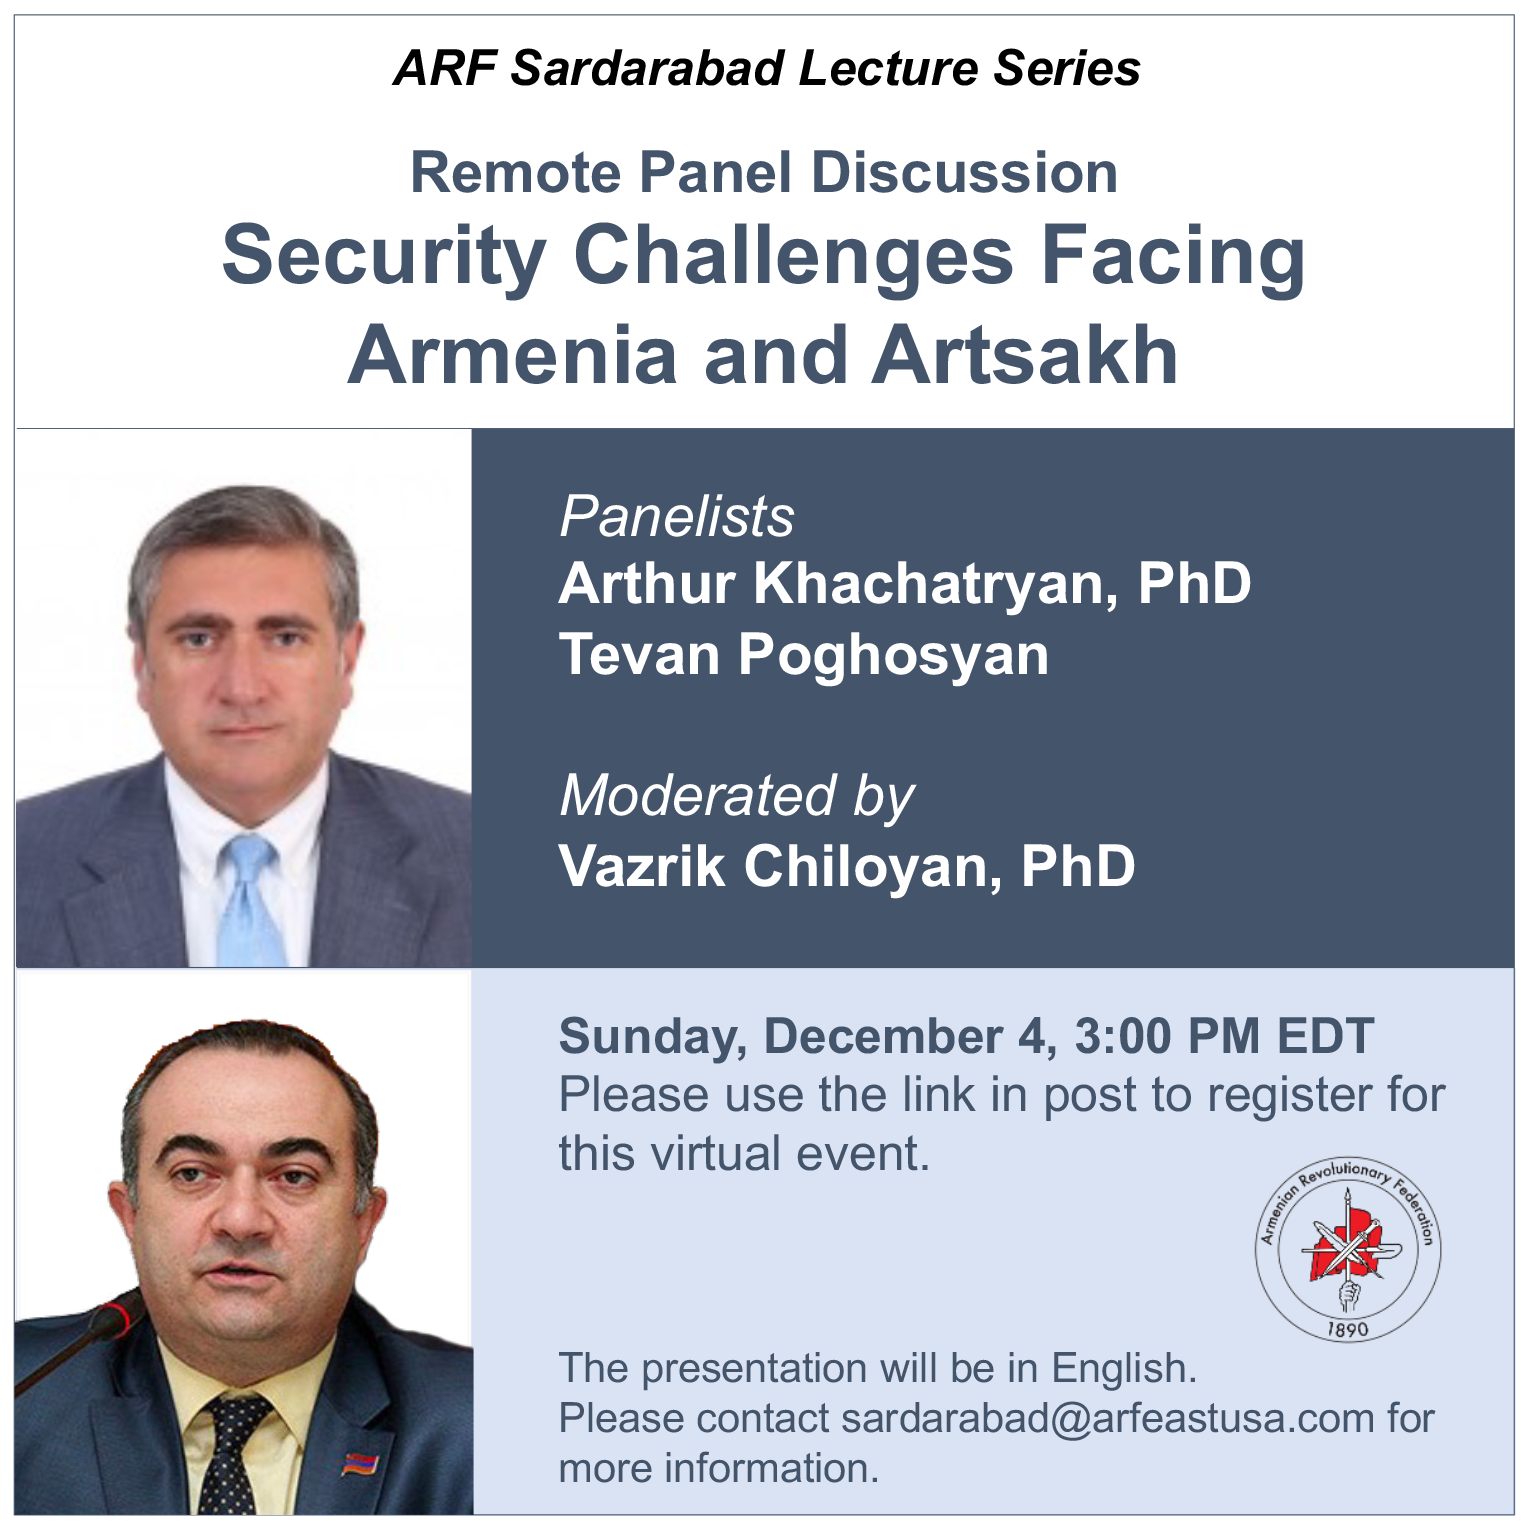 Security Challenges Facing Armenia and Artsakh